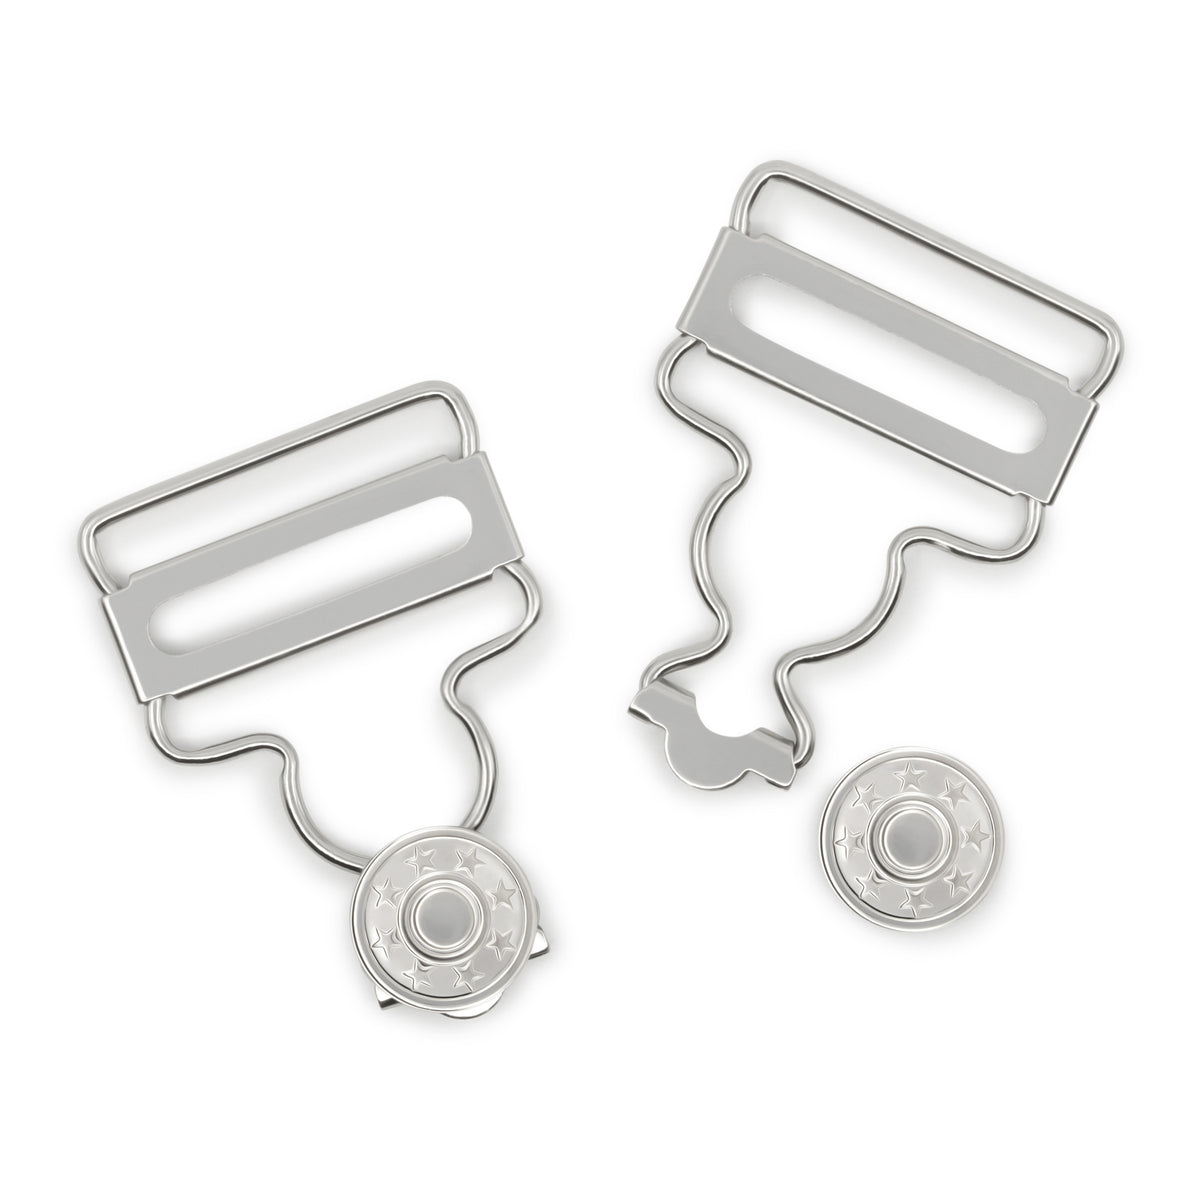 Dritz 1 inch Overall Buckles with No-Sew Buttons, Nickel, 2 pc